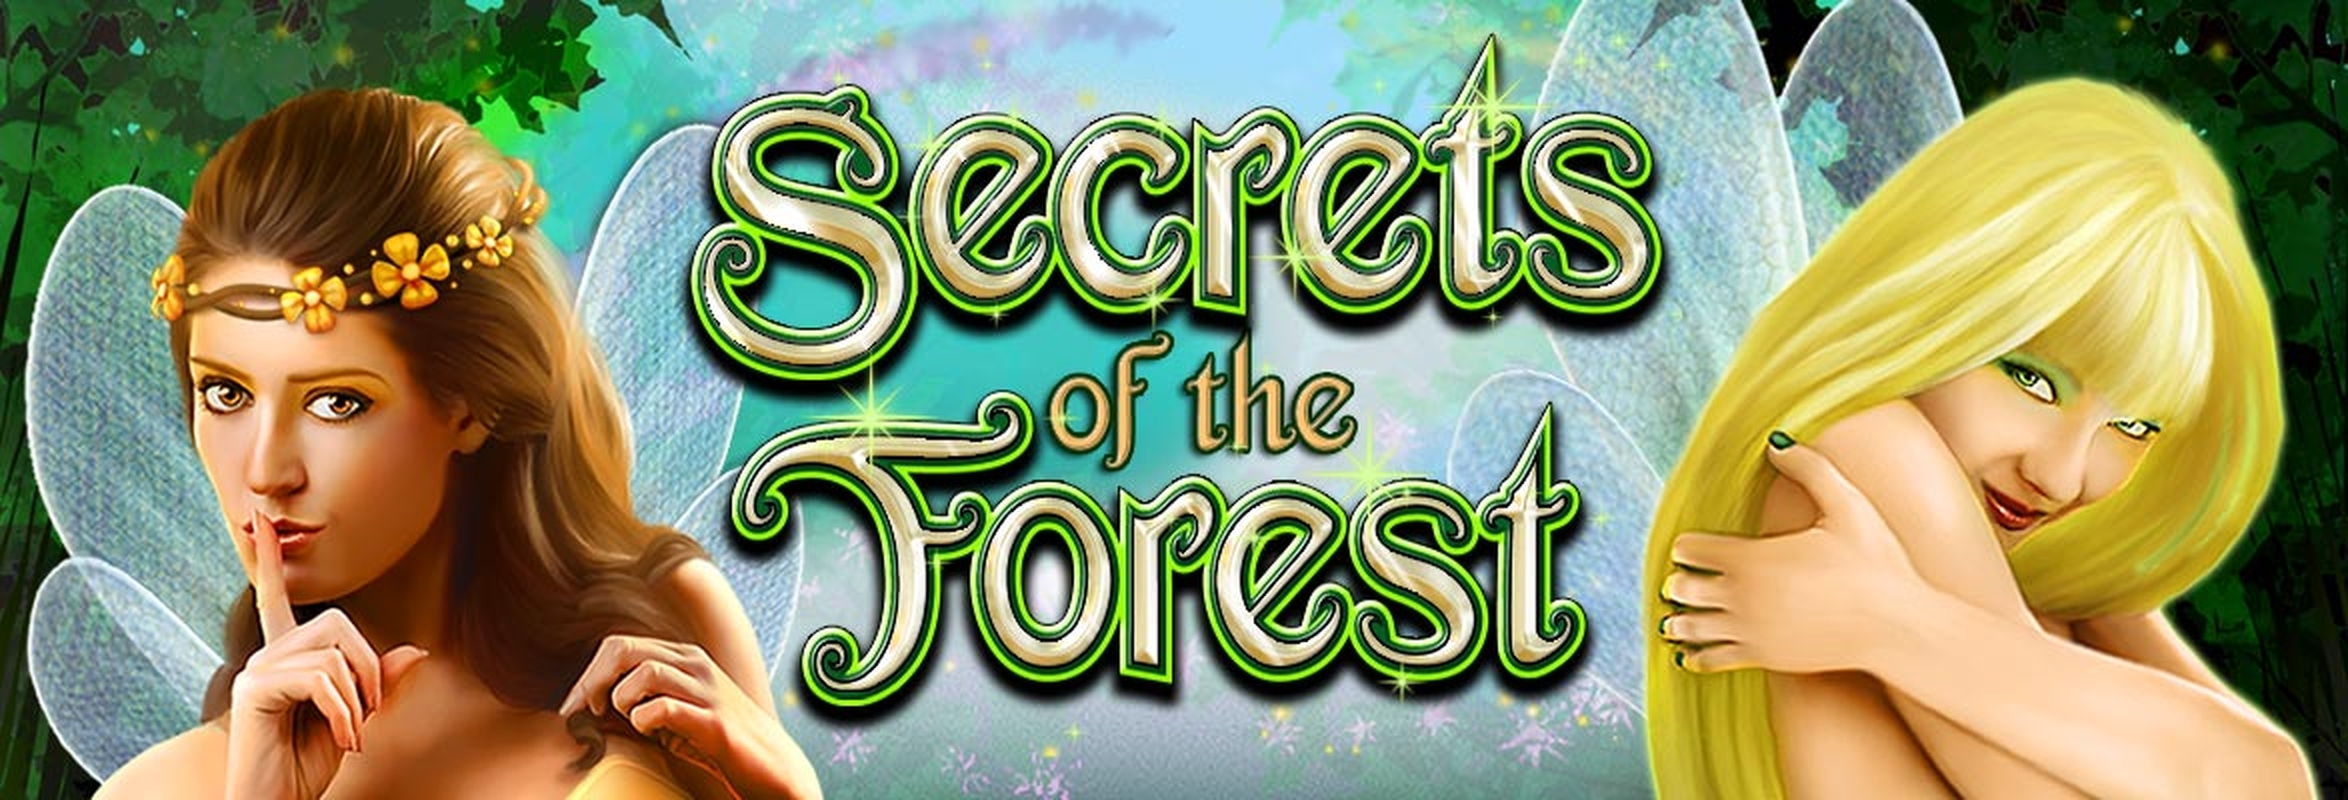 Secrets Of The Forest demo